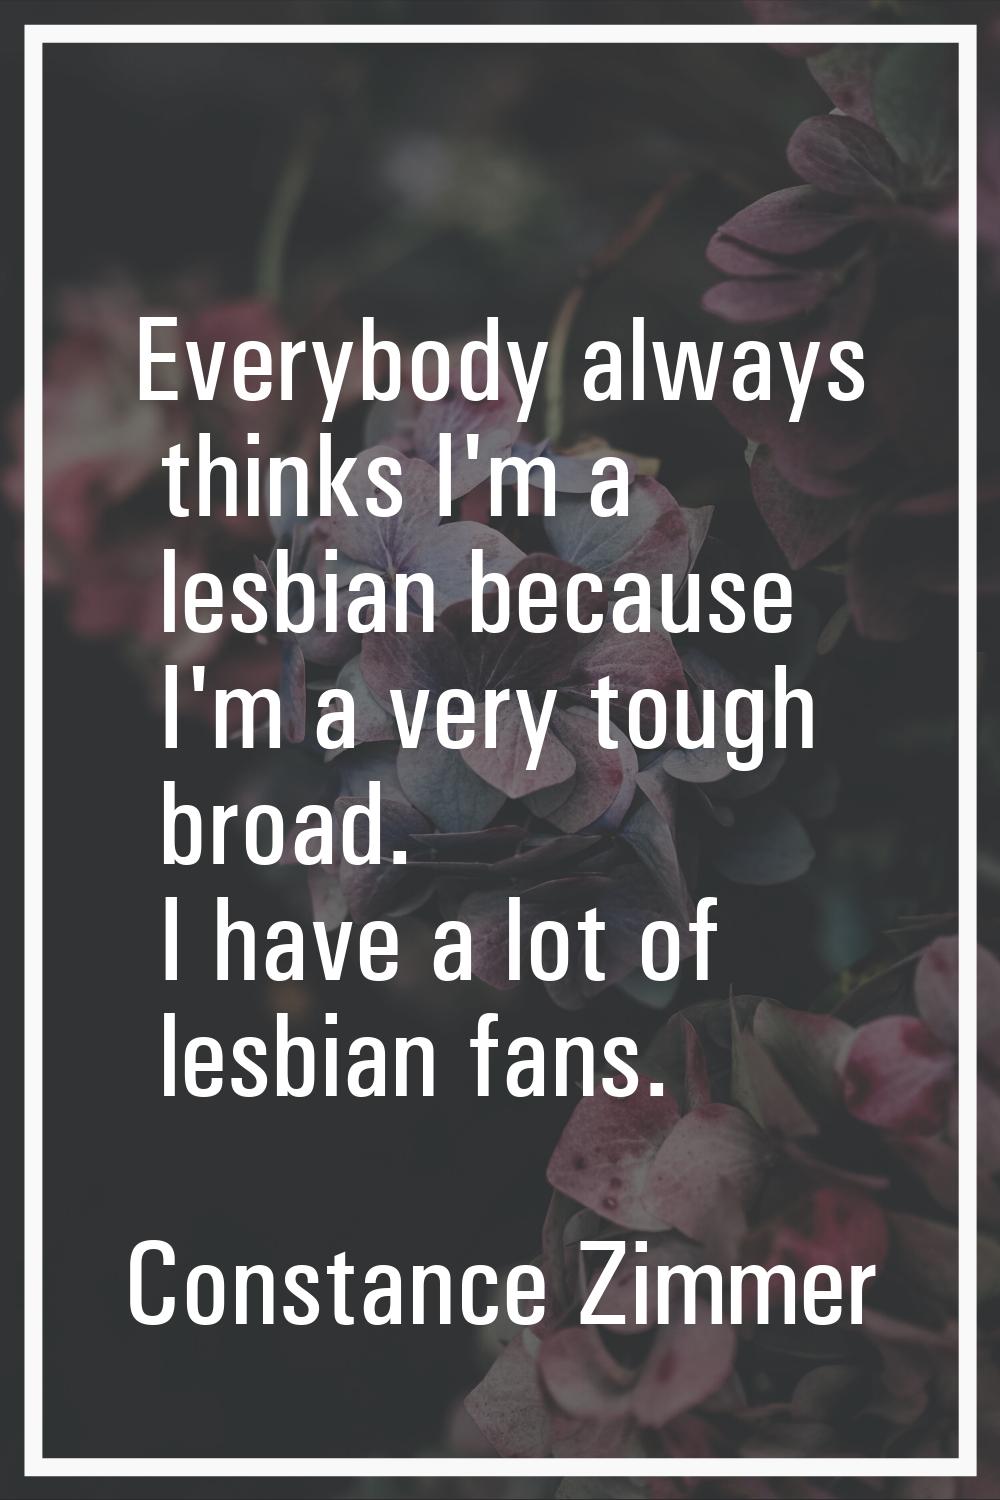 Everybody always thinks I'm a lesbian because I'm a very tough broad. I have a lot of lesbian fans.